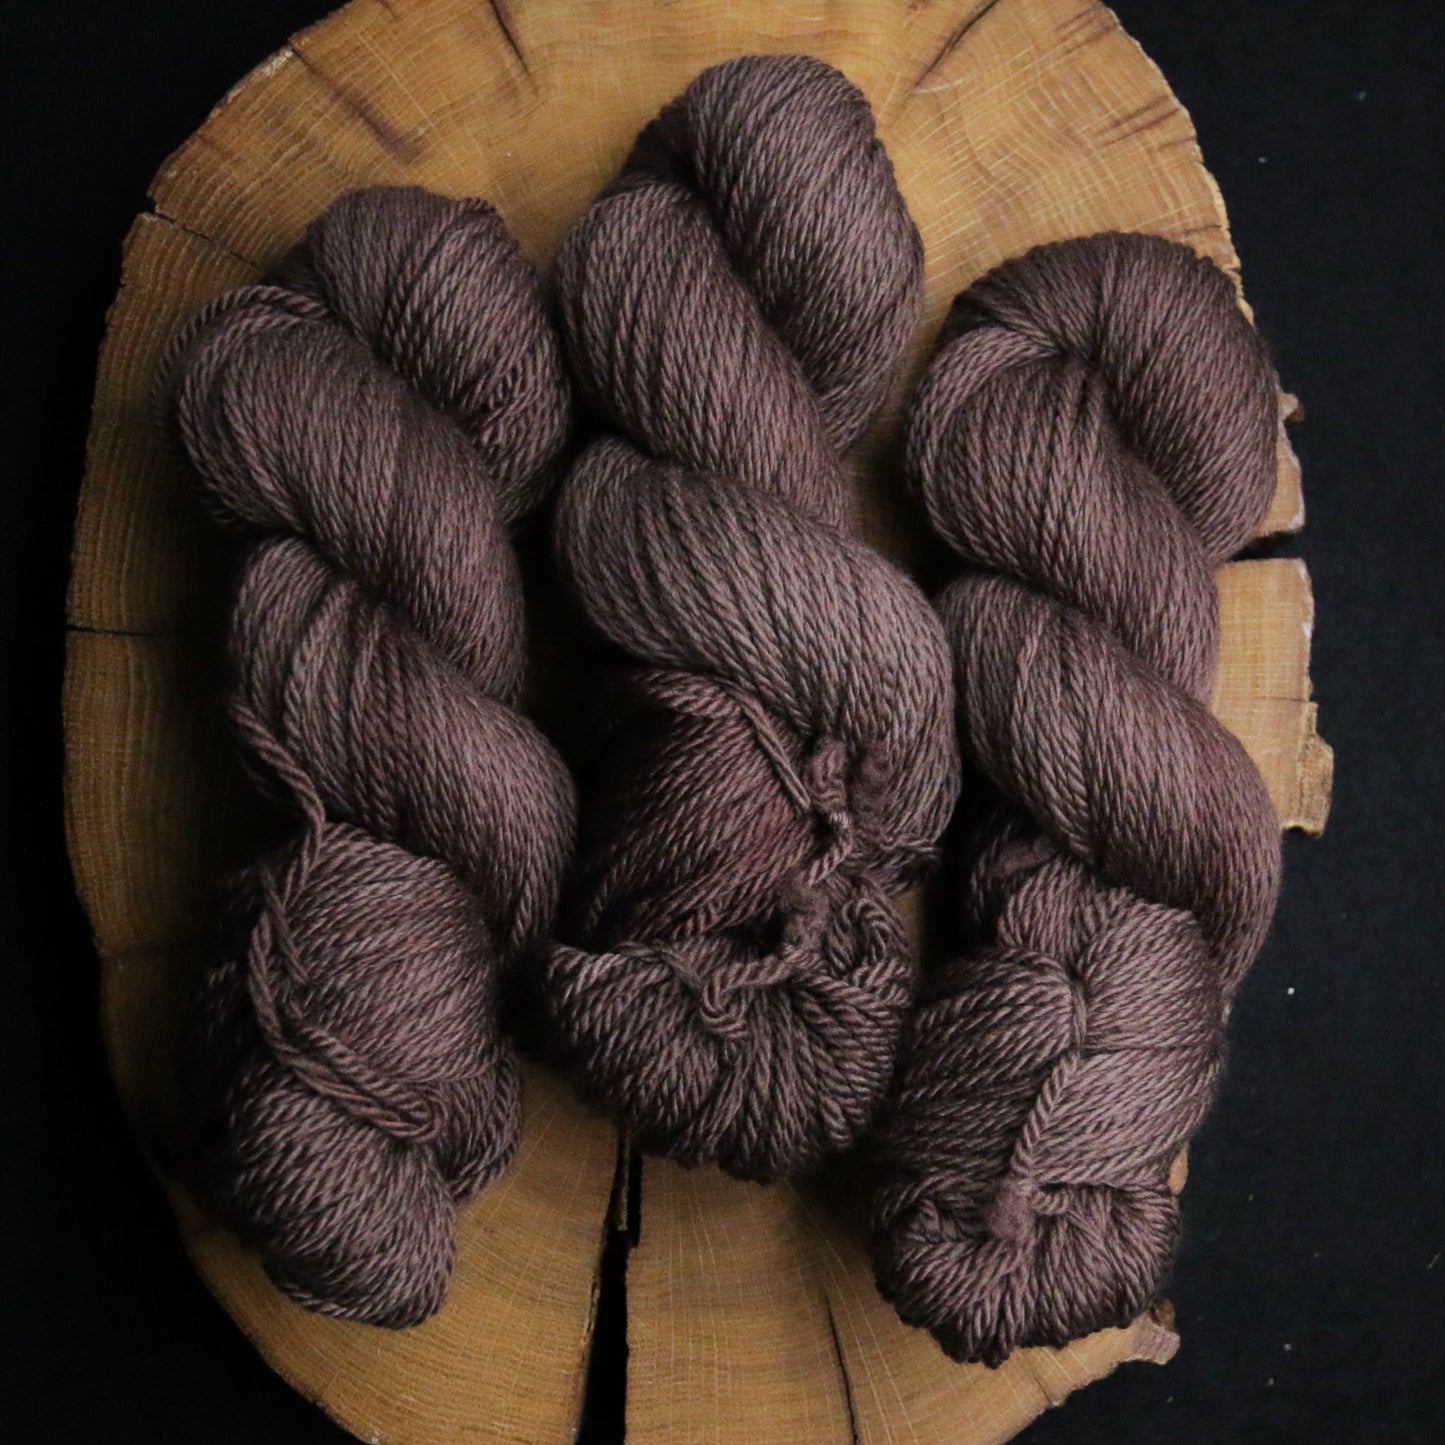 Bitter Chocolate - Sweater Quantity and Dyed to Order